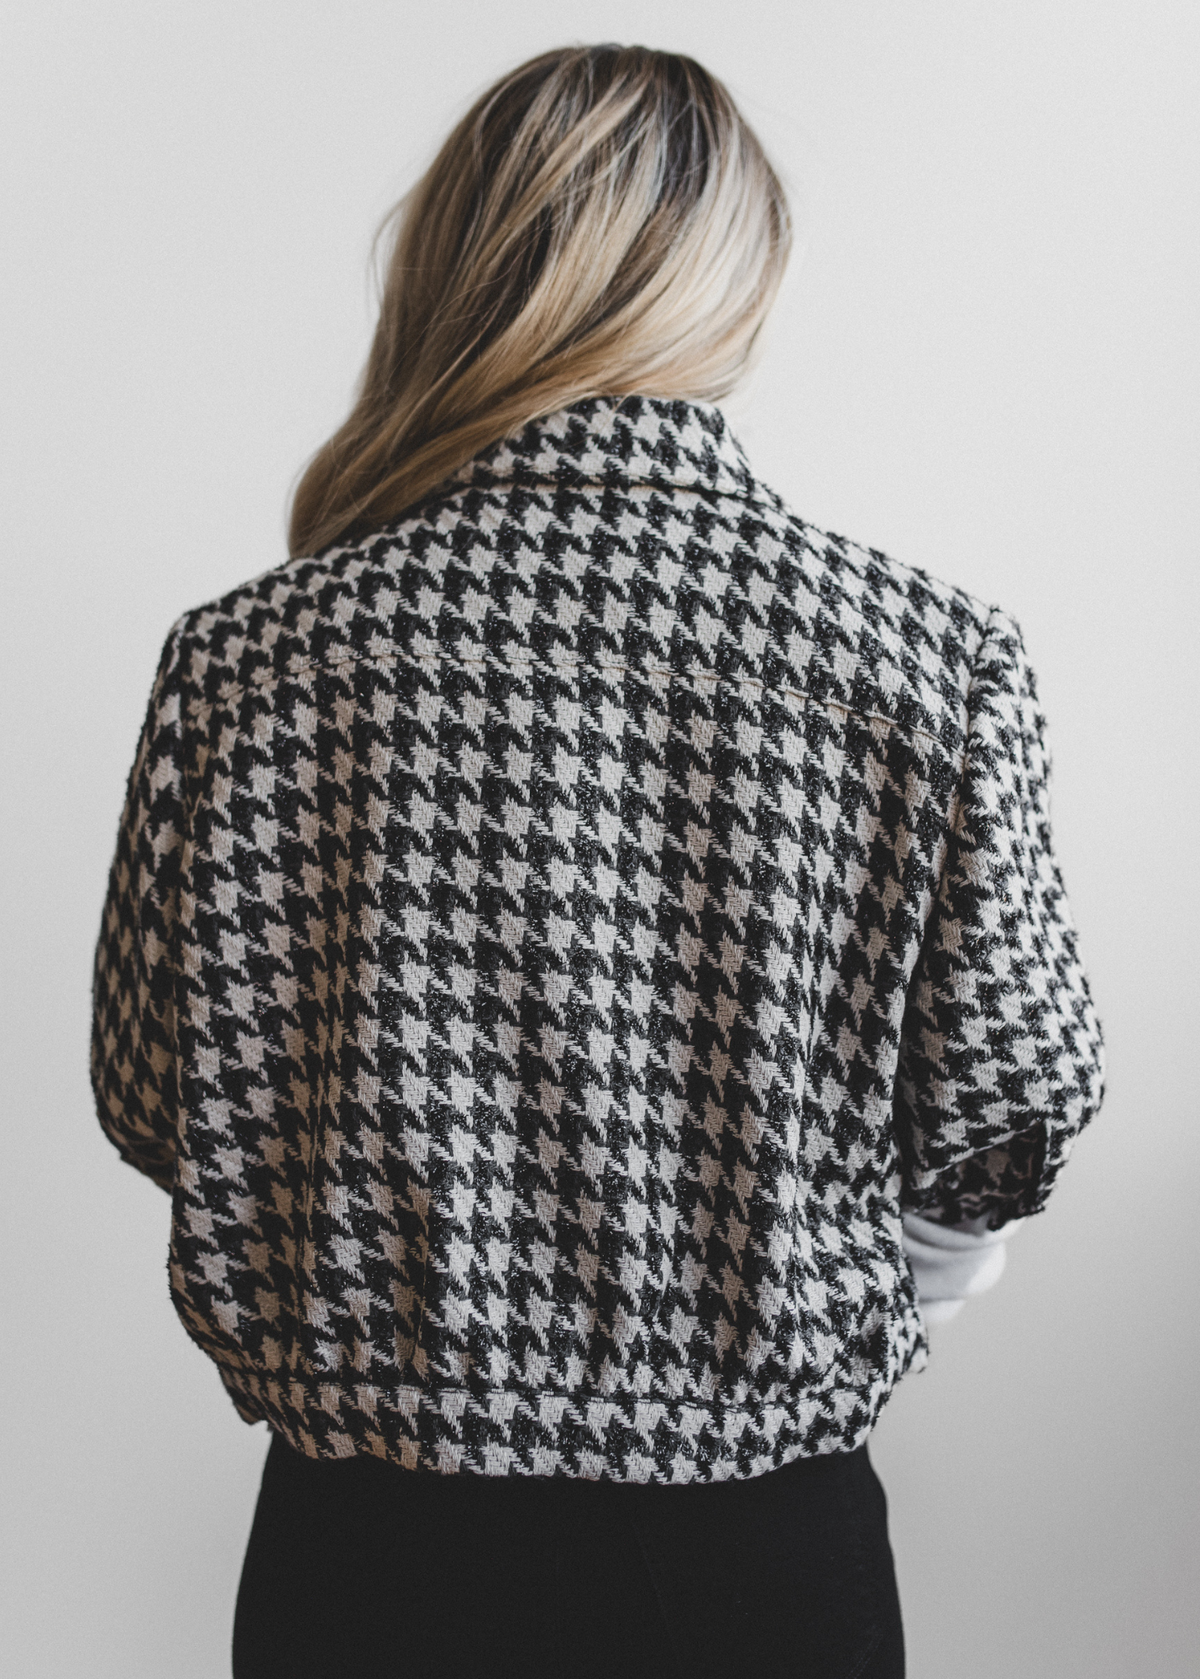 L'AGENCE Cove Houndstooth Cropped Jacket